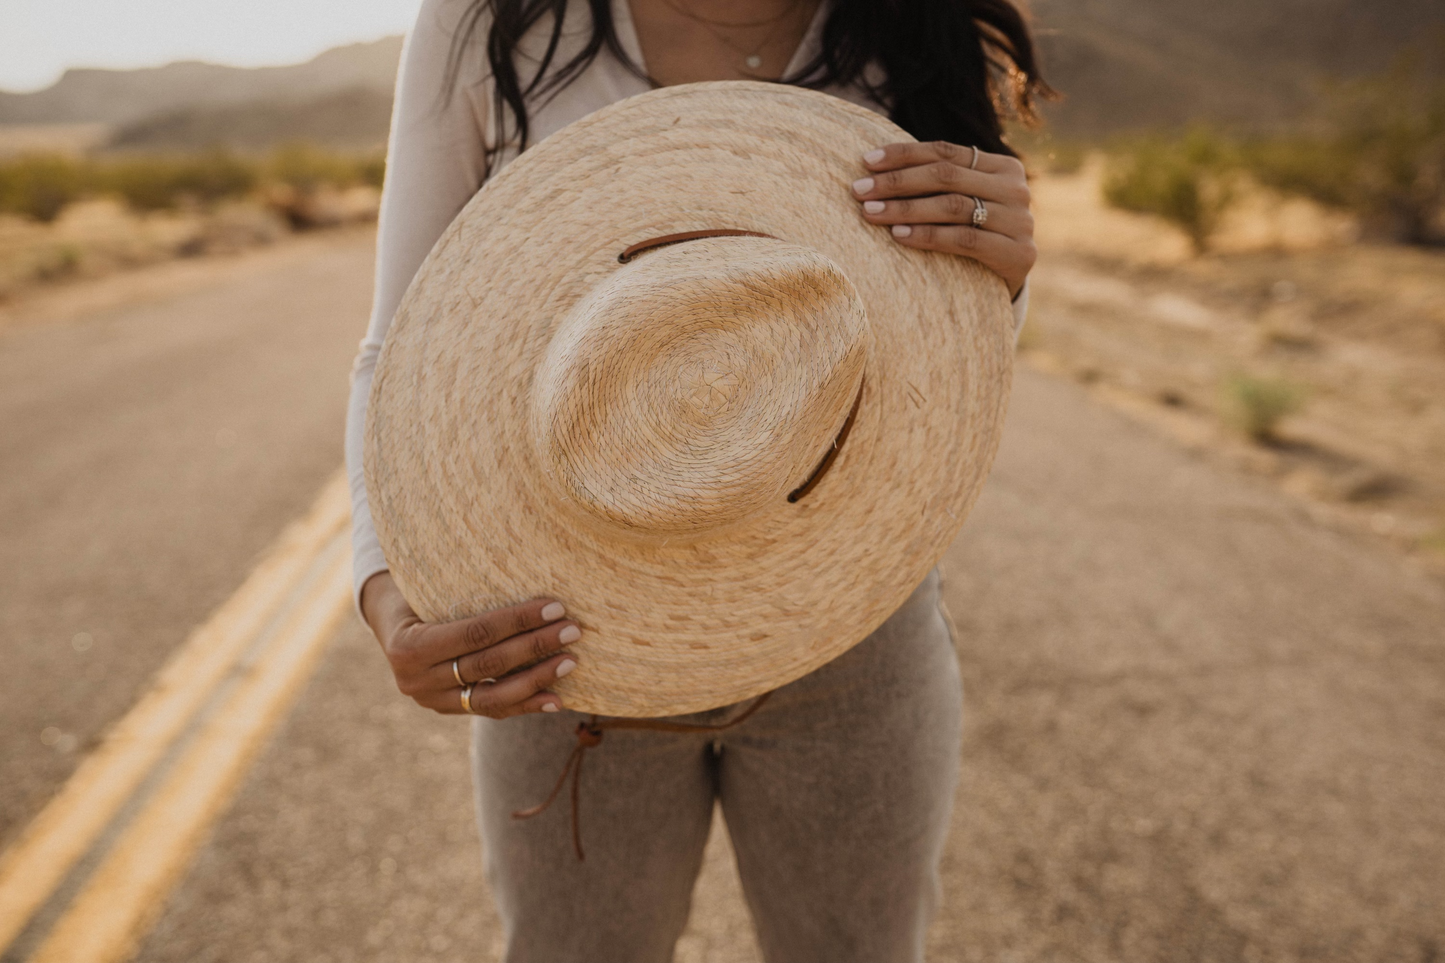 Western Cowgirl Palm Leaf Hats with Chin Straps